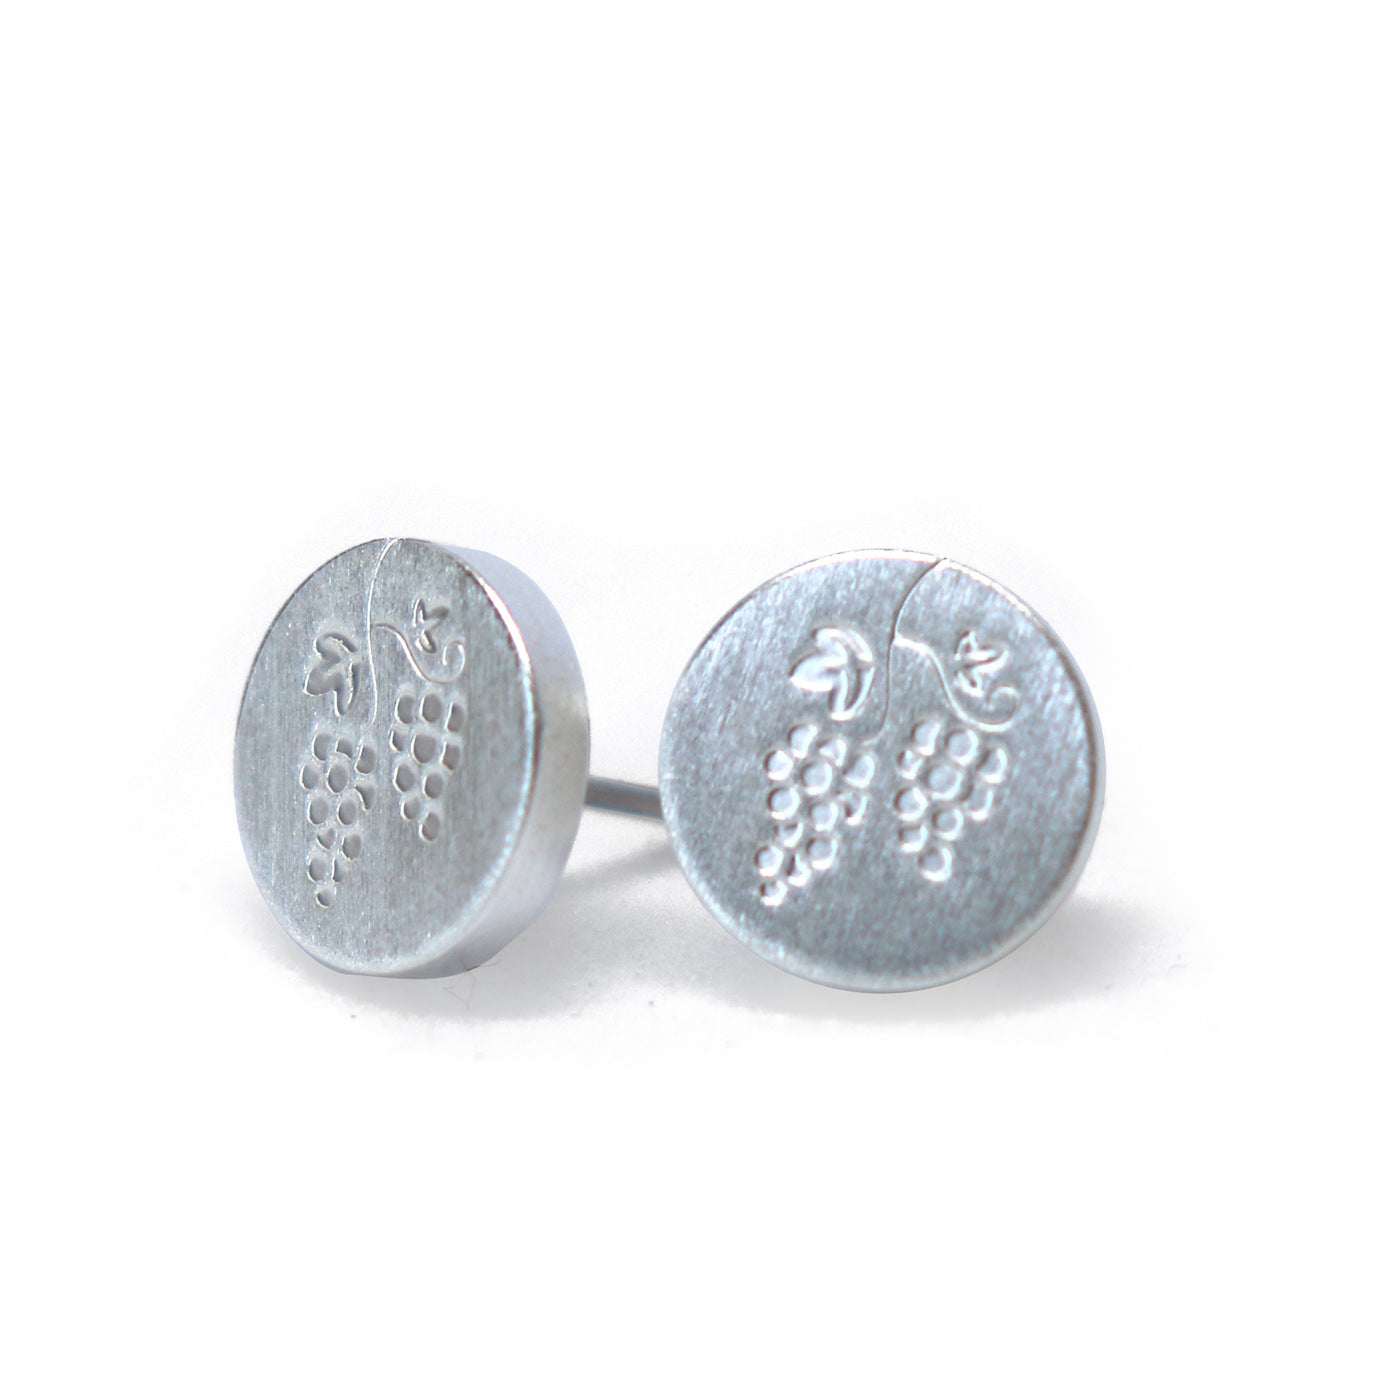 Keke Silver south island sauvignon blanc wine grapes etched silver stud earrings NZ 